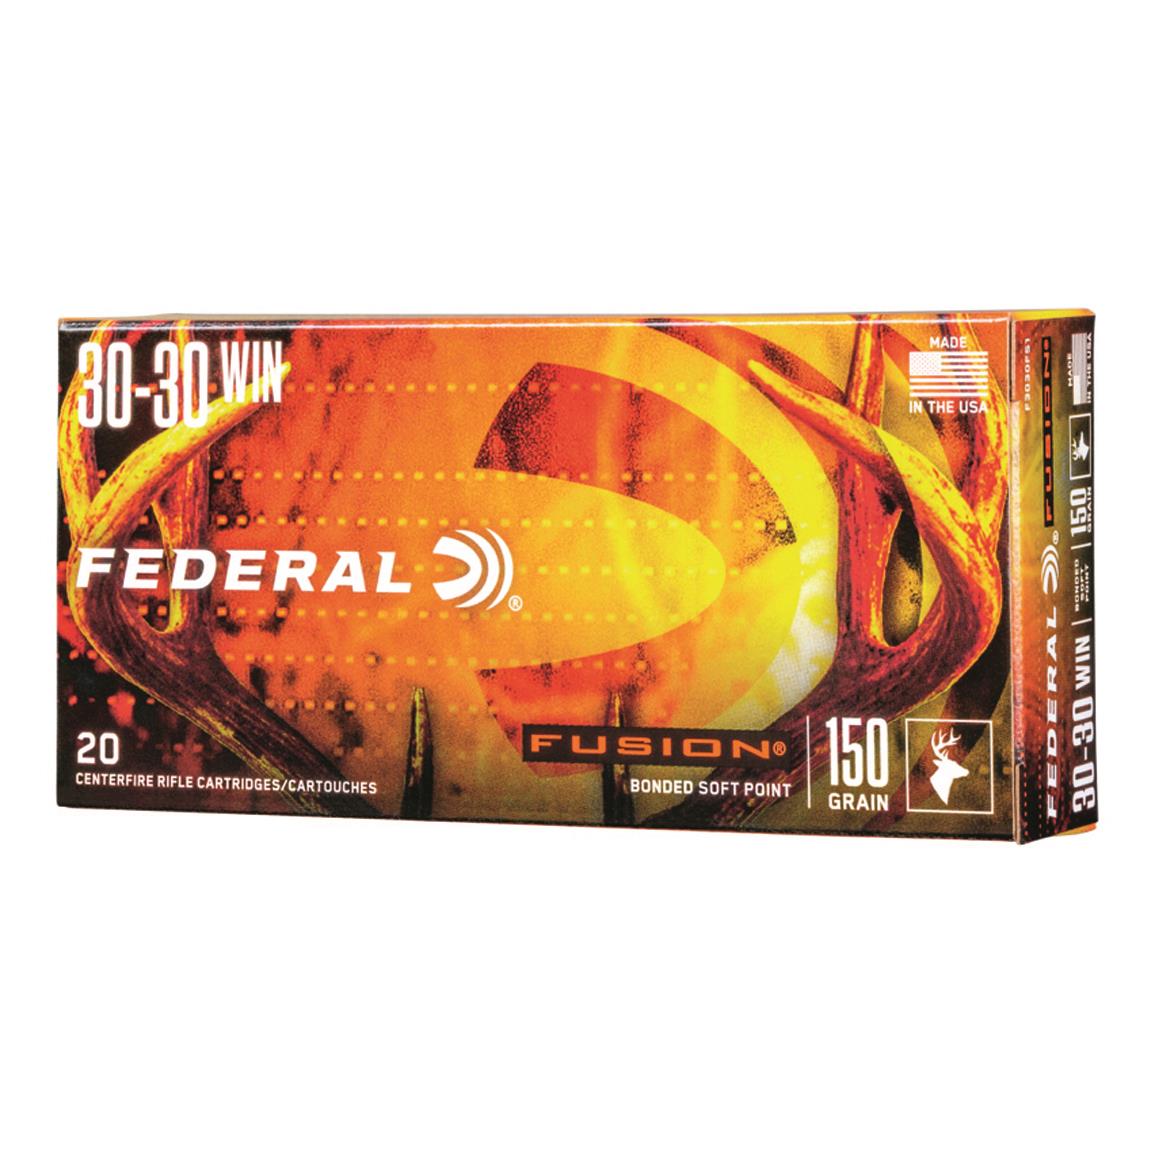 Federal Fusion .30-30 Winchester, SP, 150 Grain, 20 Rounds